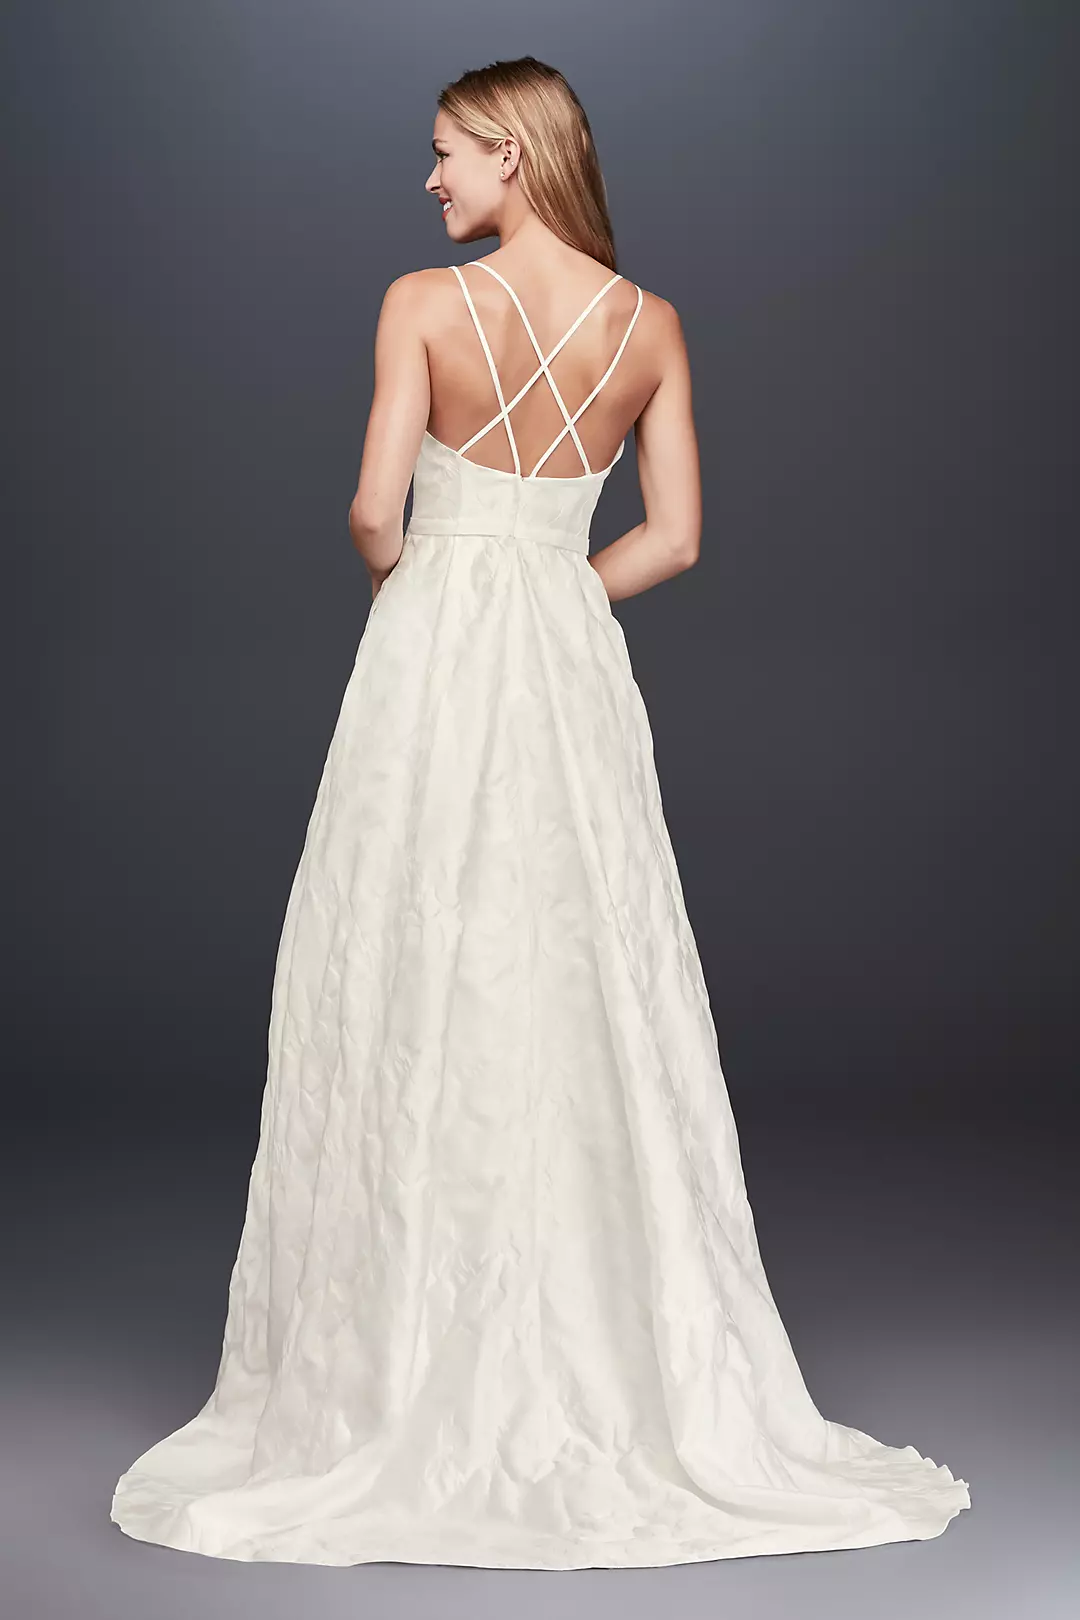 As-Is Floral Jacquard A-Line Wedding Dress Image 2